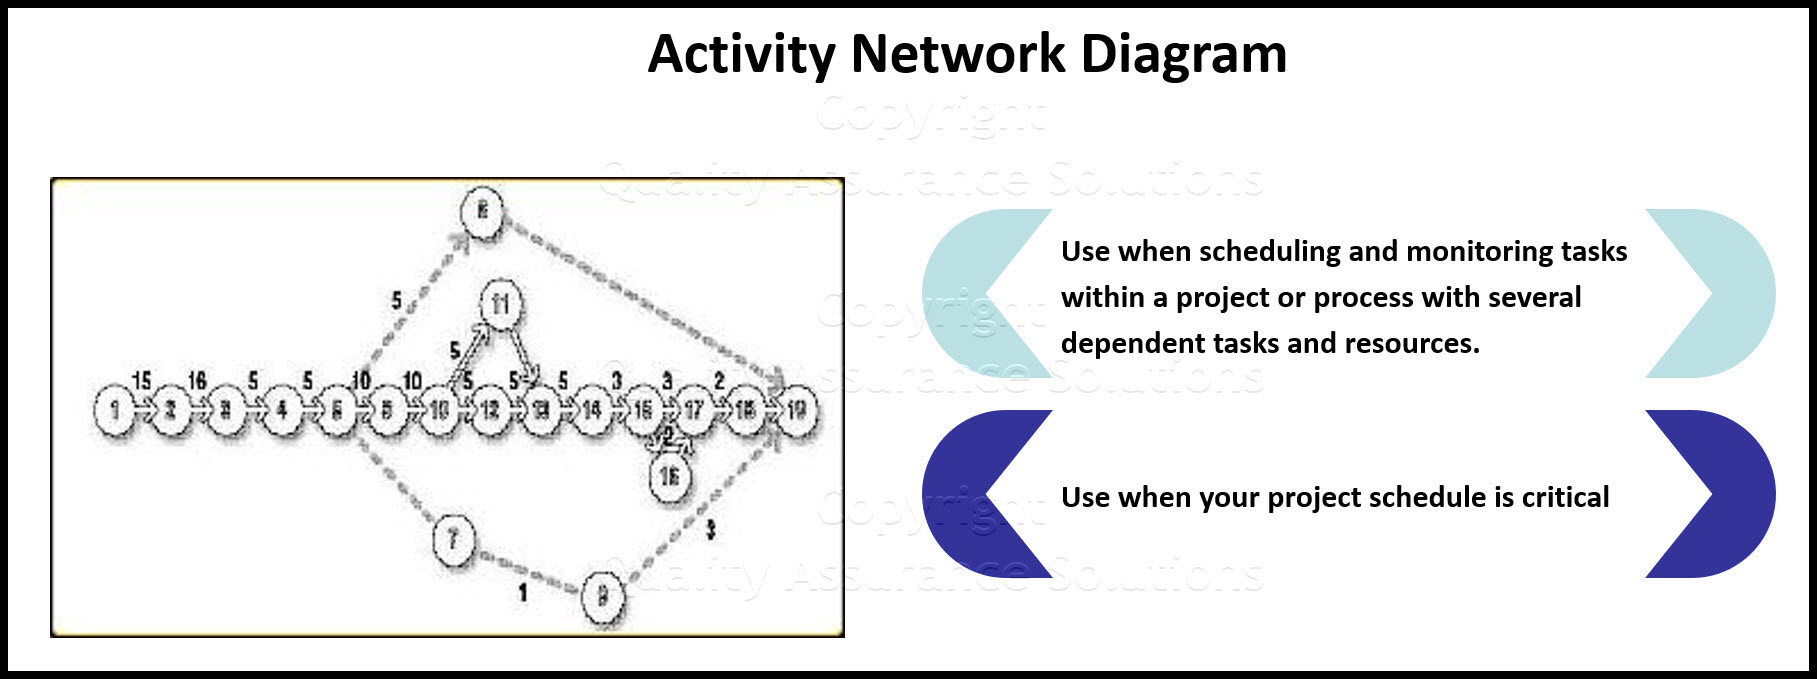 what is the activity network diagram